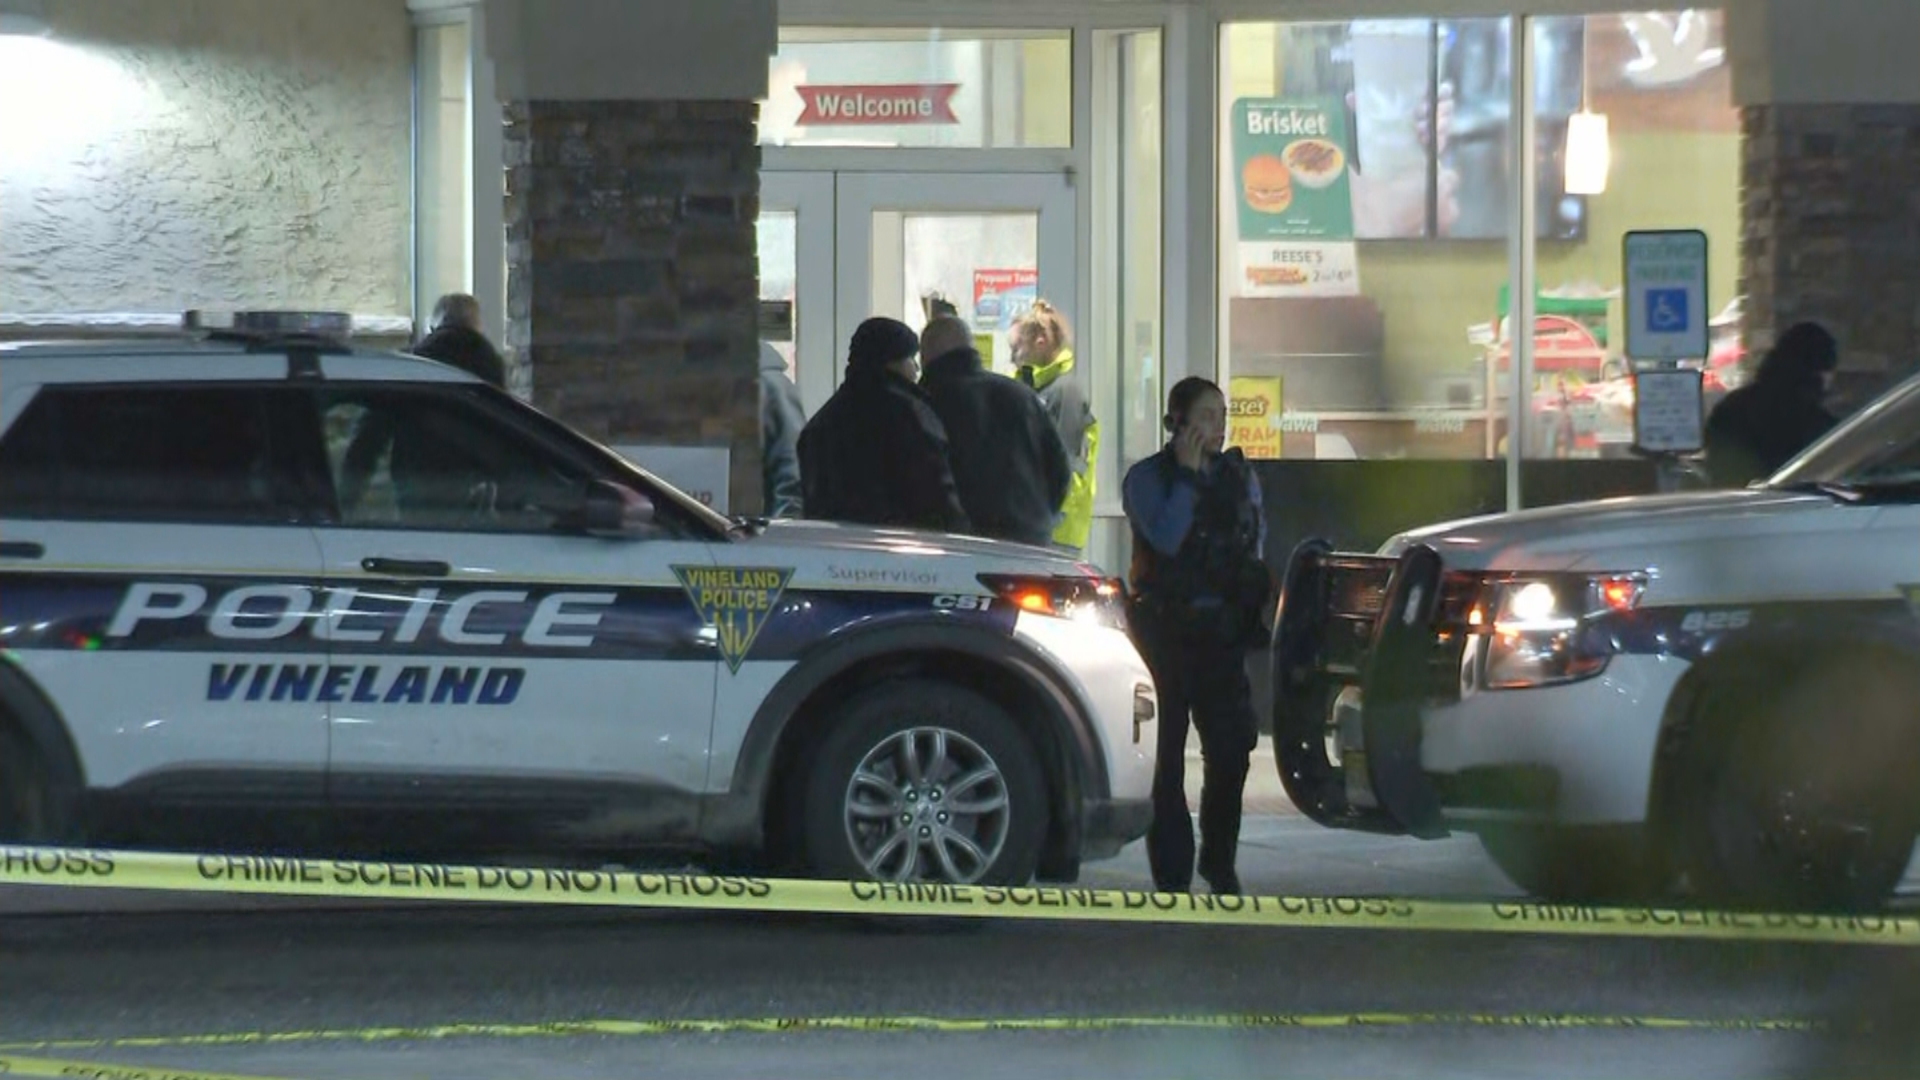 23-year-old man killed in targeted shooting outside Vineland Wawa, Cumberland County prosecutor says – CBS Philly